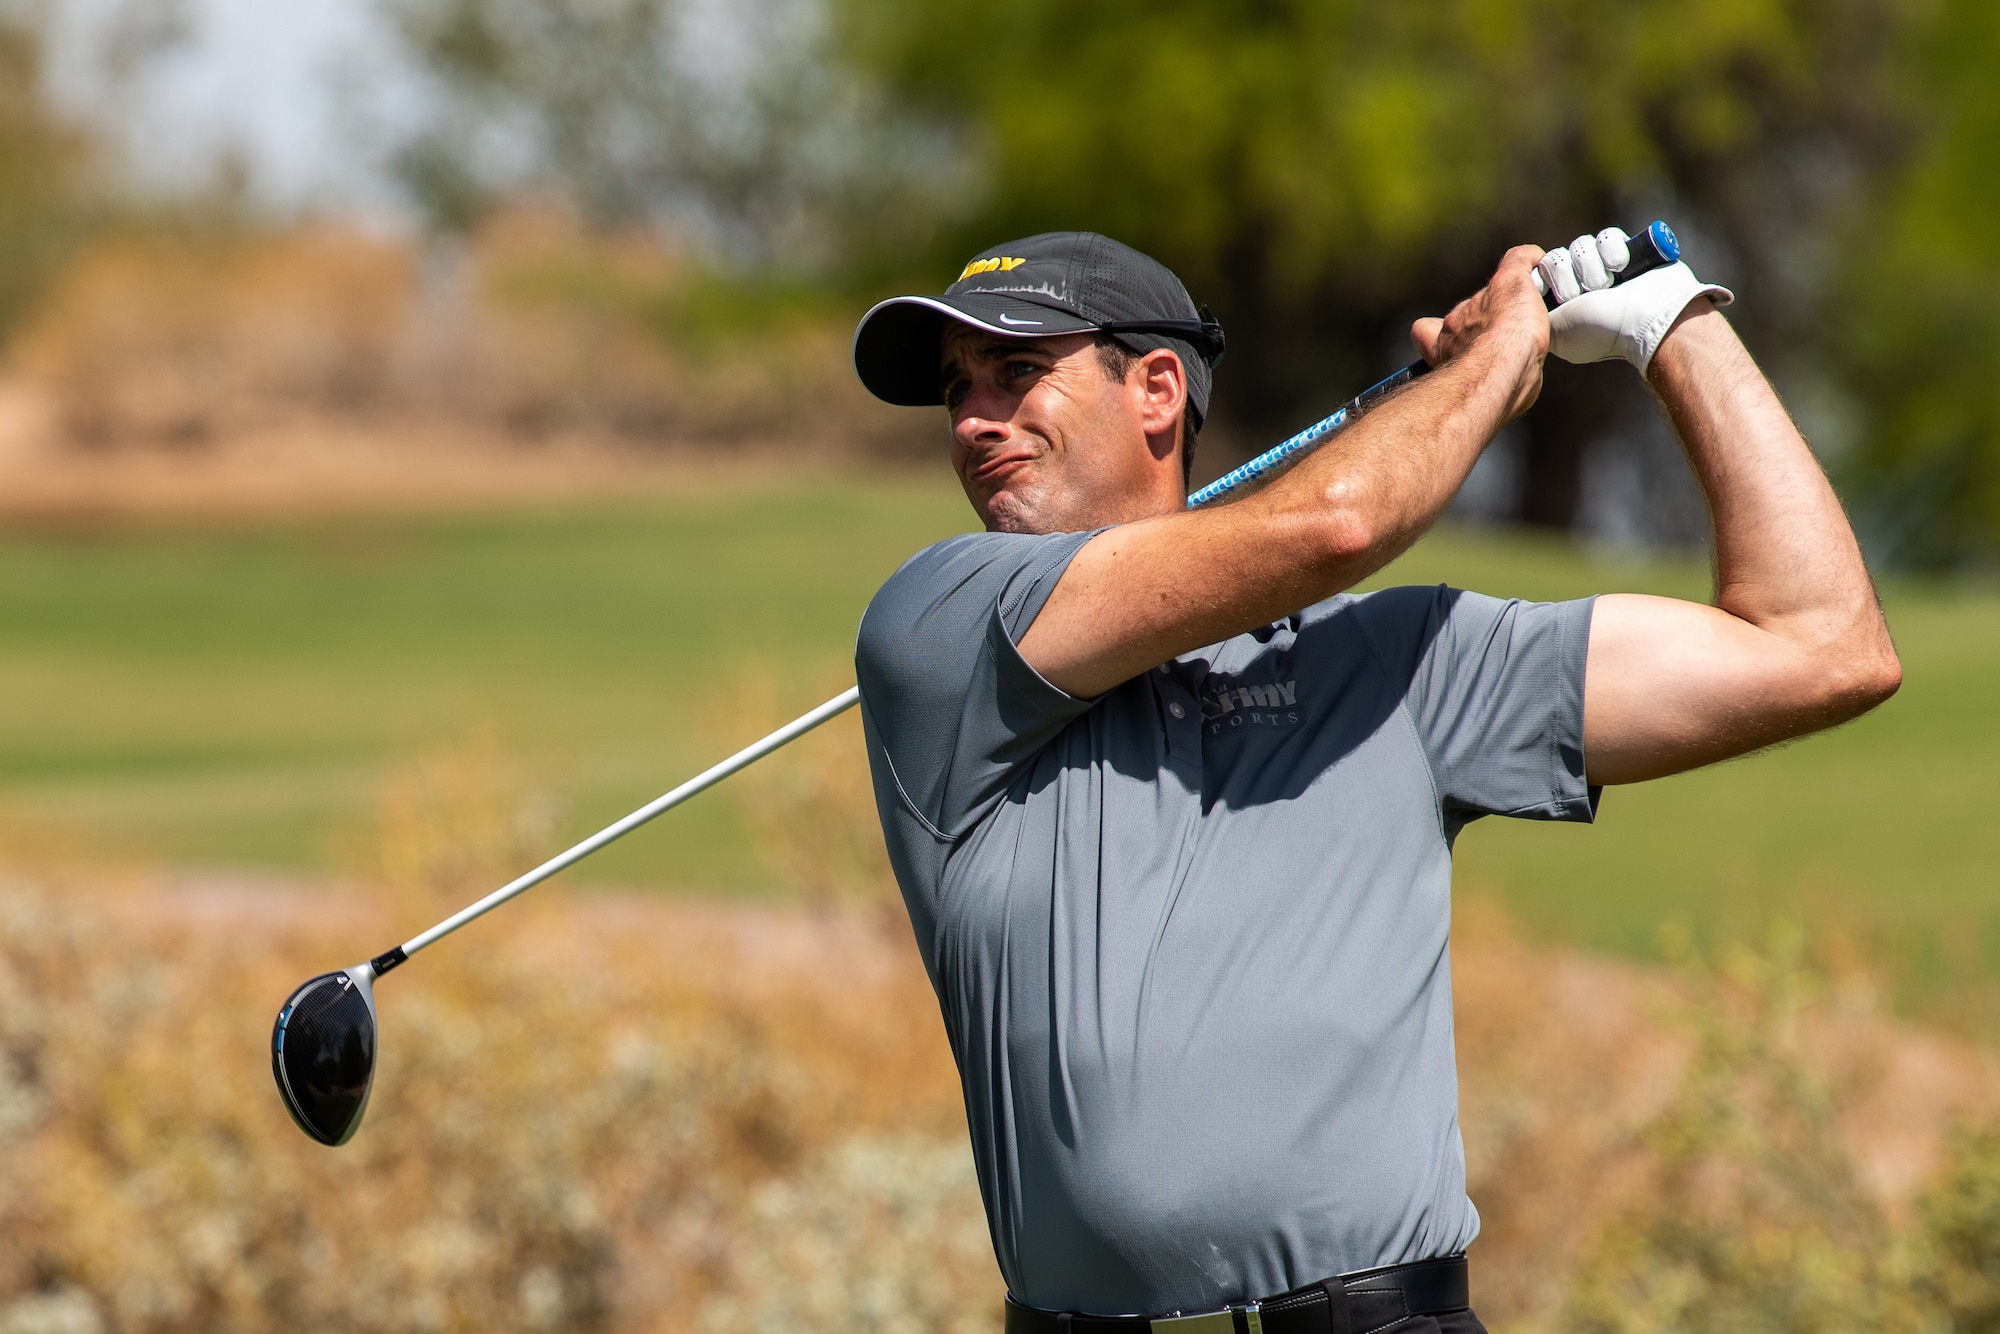 An Armed Forces Golf Championship participant tees off, May 16, 2019, at Falcon Dunes Golf Course near Luke Air Force Base, Ariz.